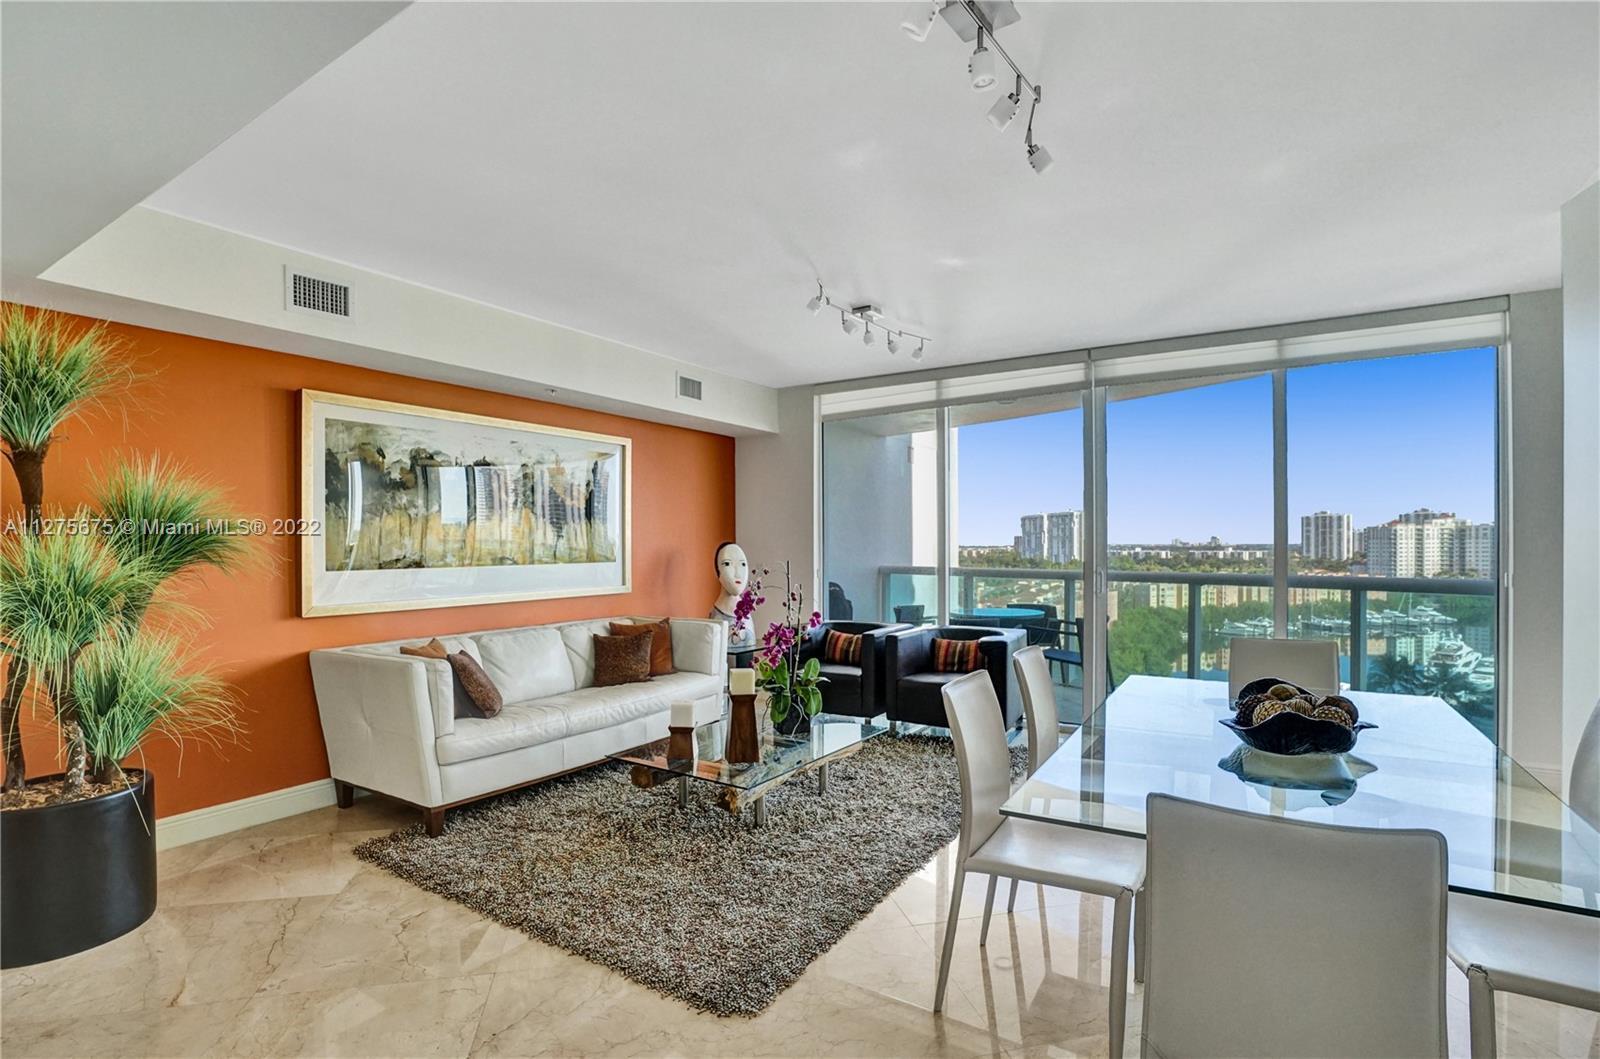 Beautiful apartment in The Parc at Turnberry in the heart of Aventura, with incredible views of the 